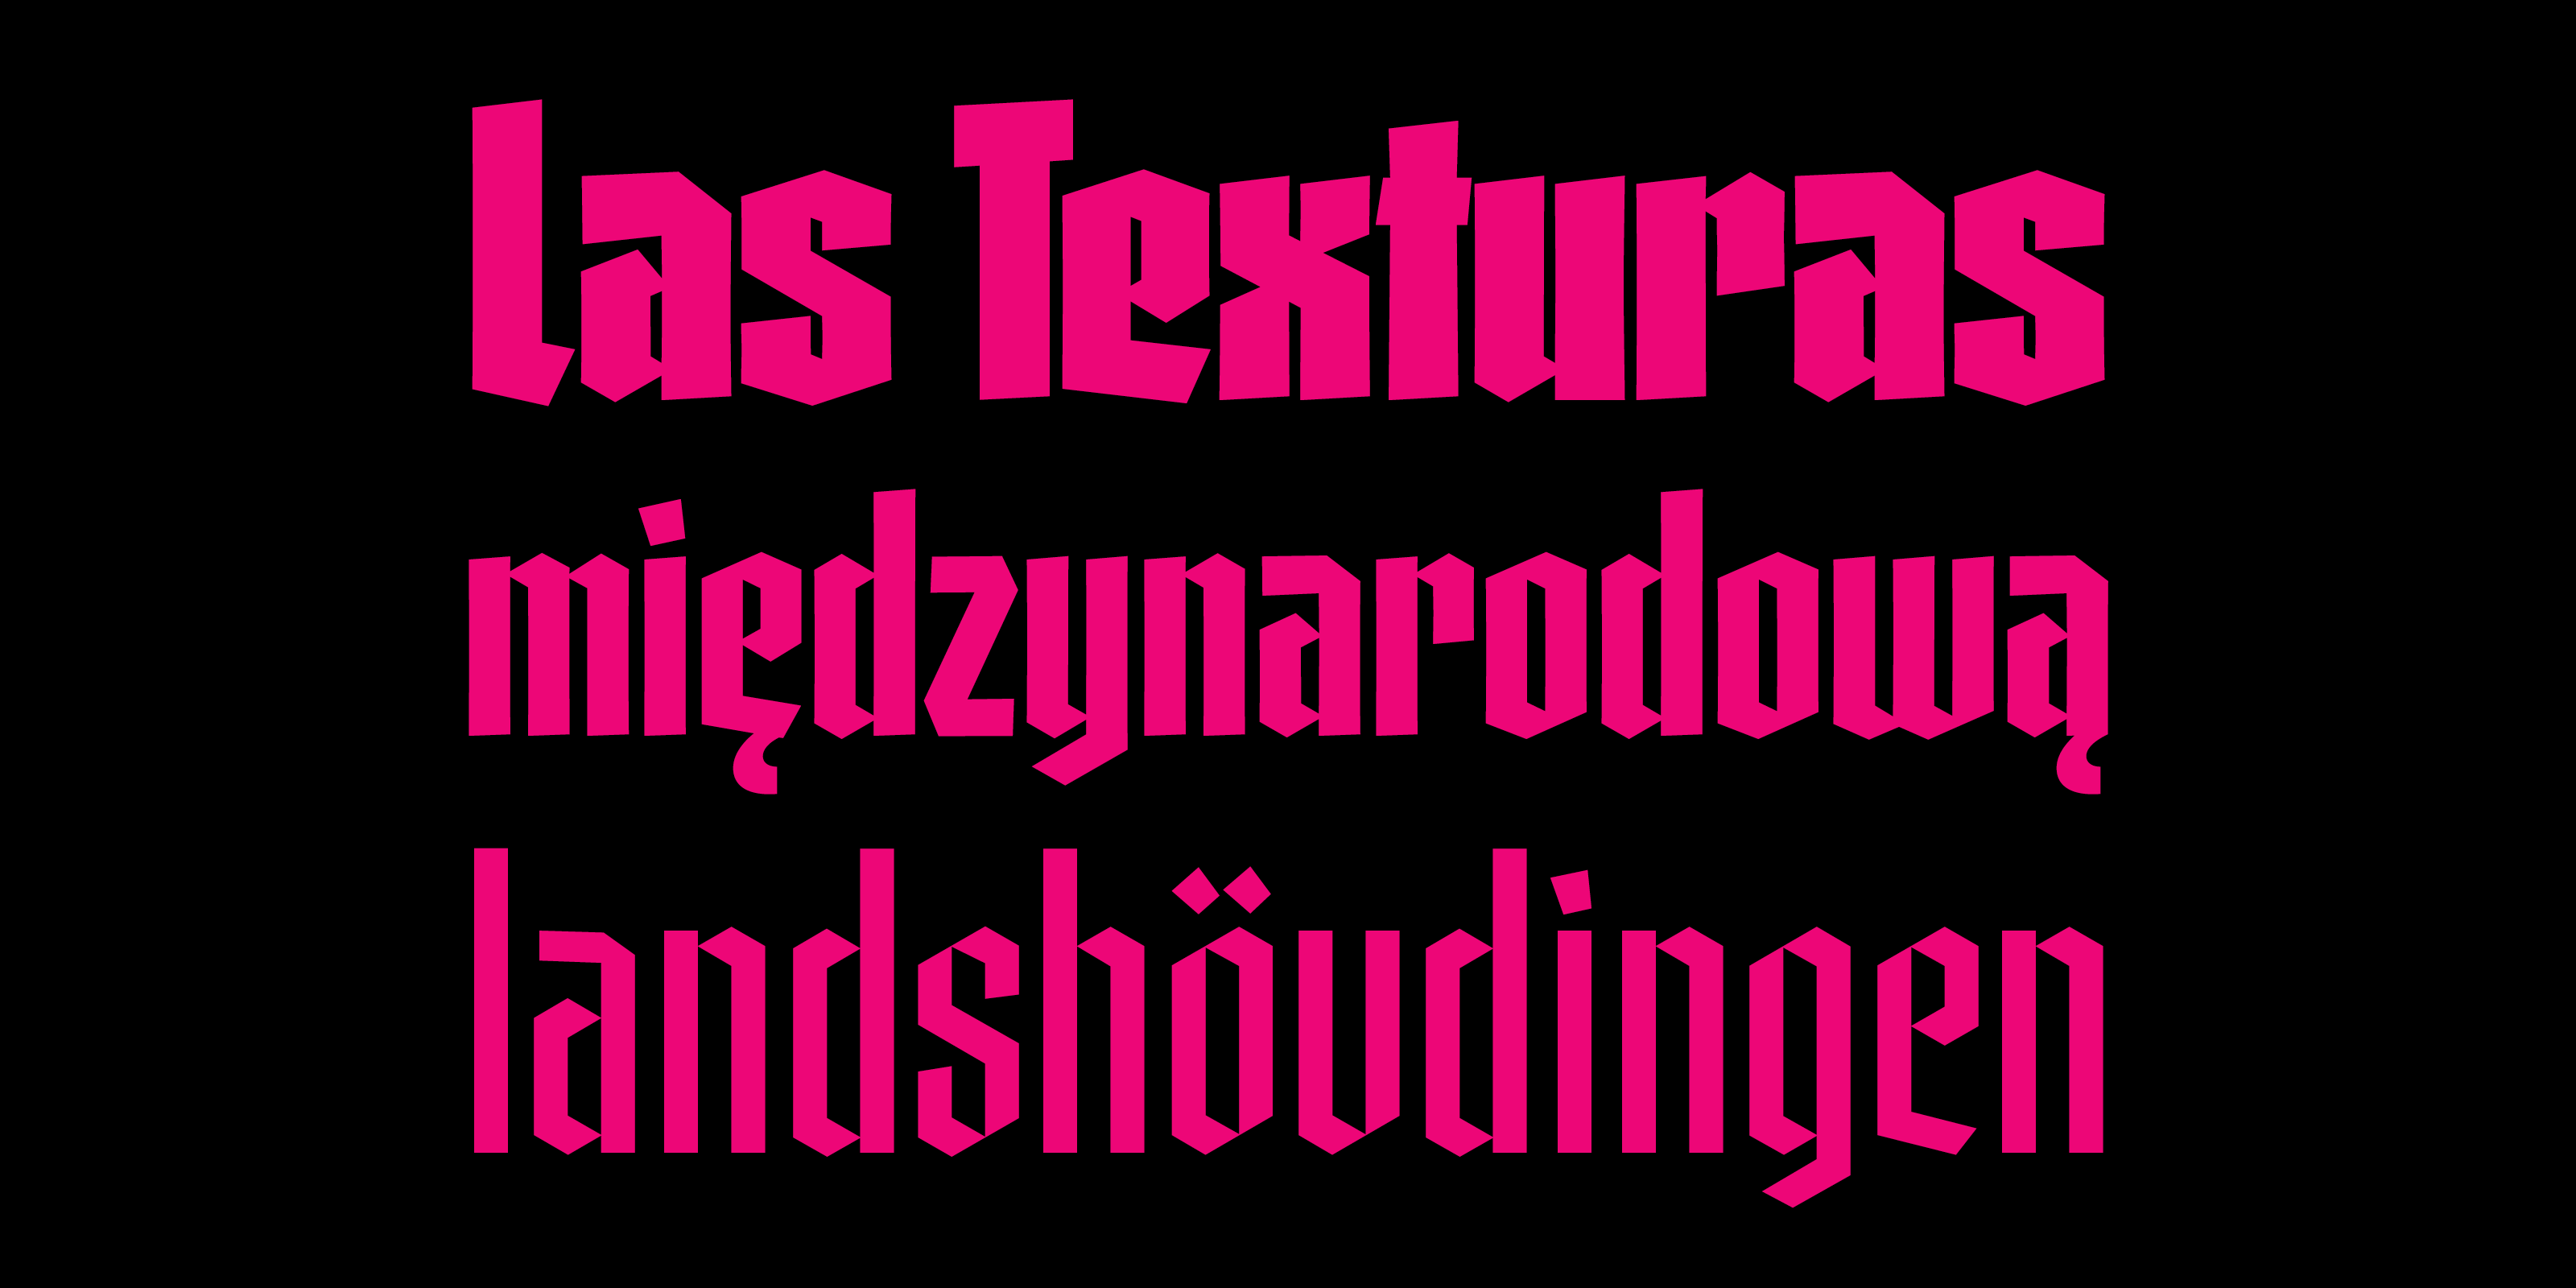 Card displaying Gandur New typeface in various styles